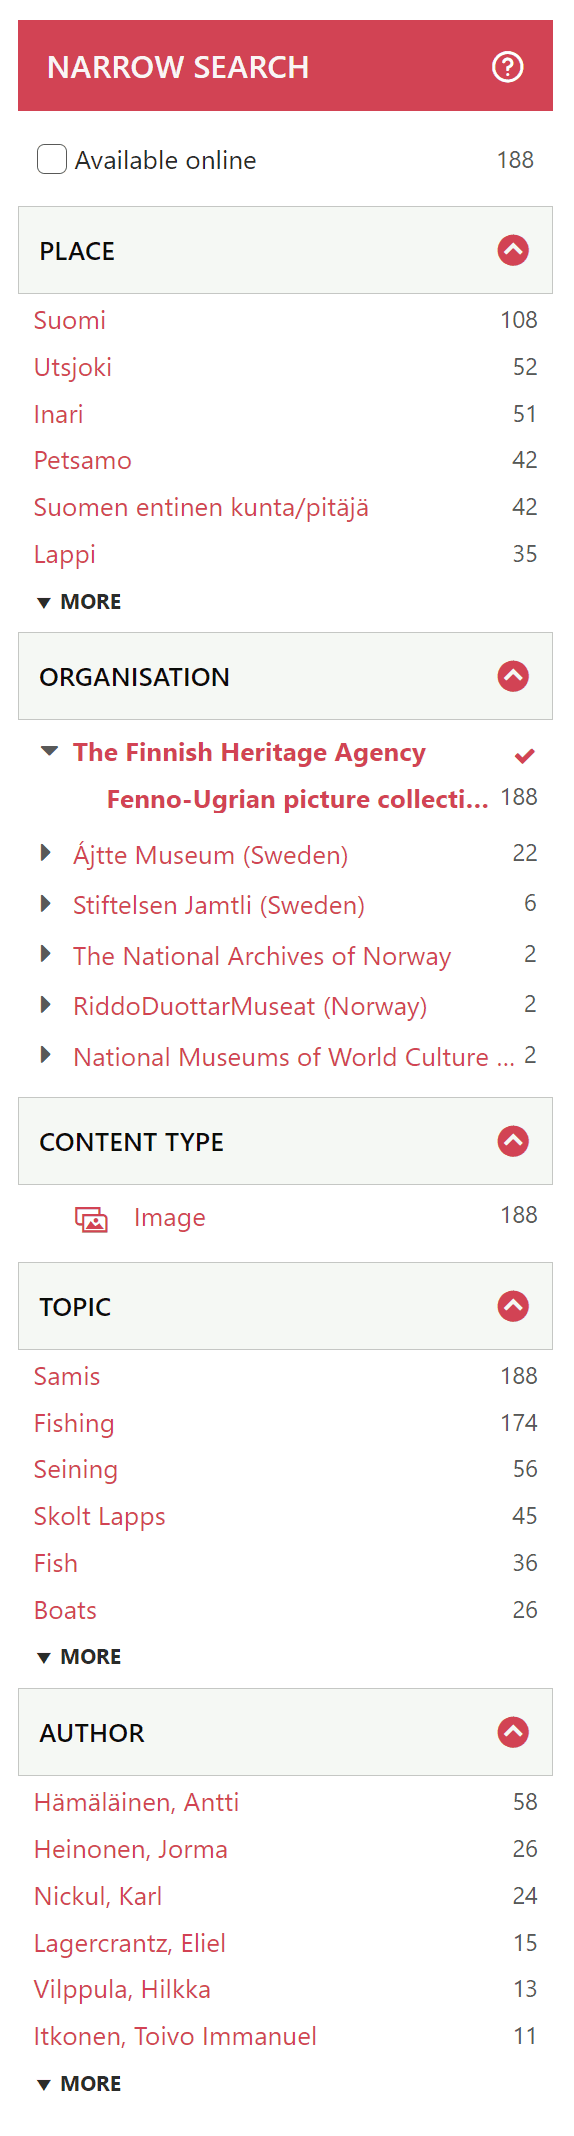 Search terms and filters